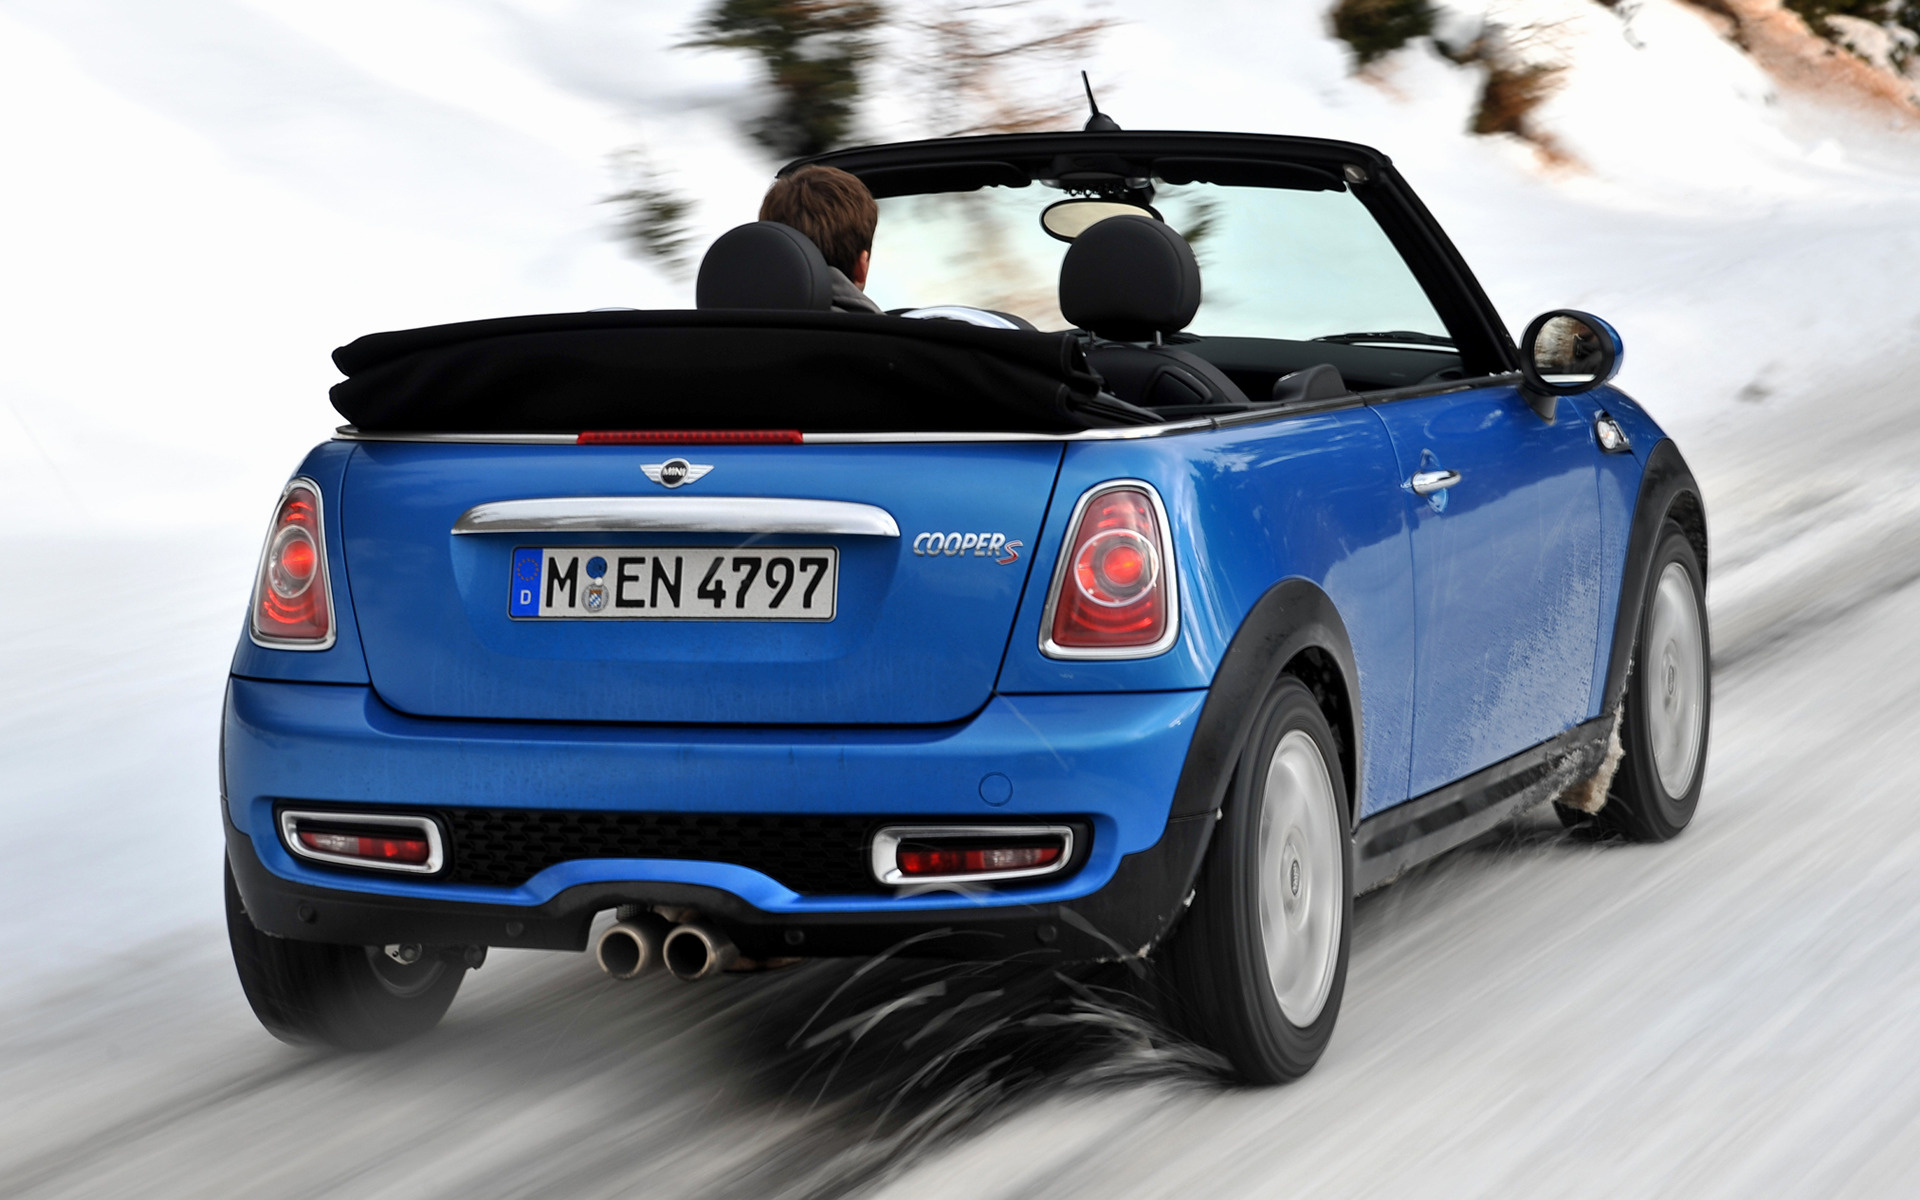 2010 Mini Cooper S Cabrio - Wallpapers and HD Images | Car Pixel